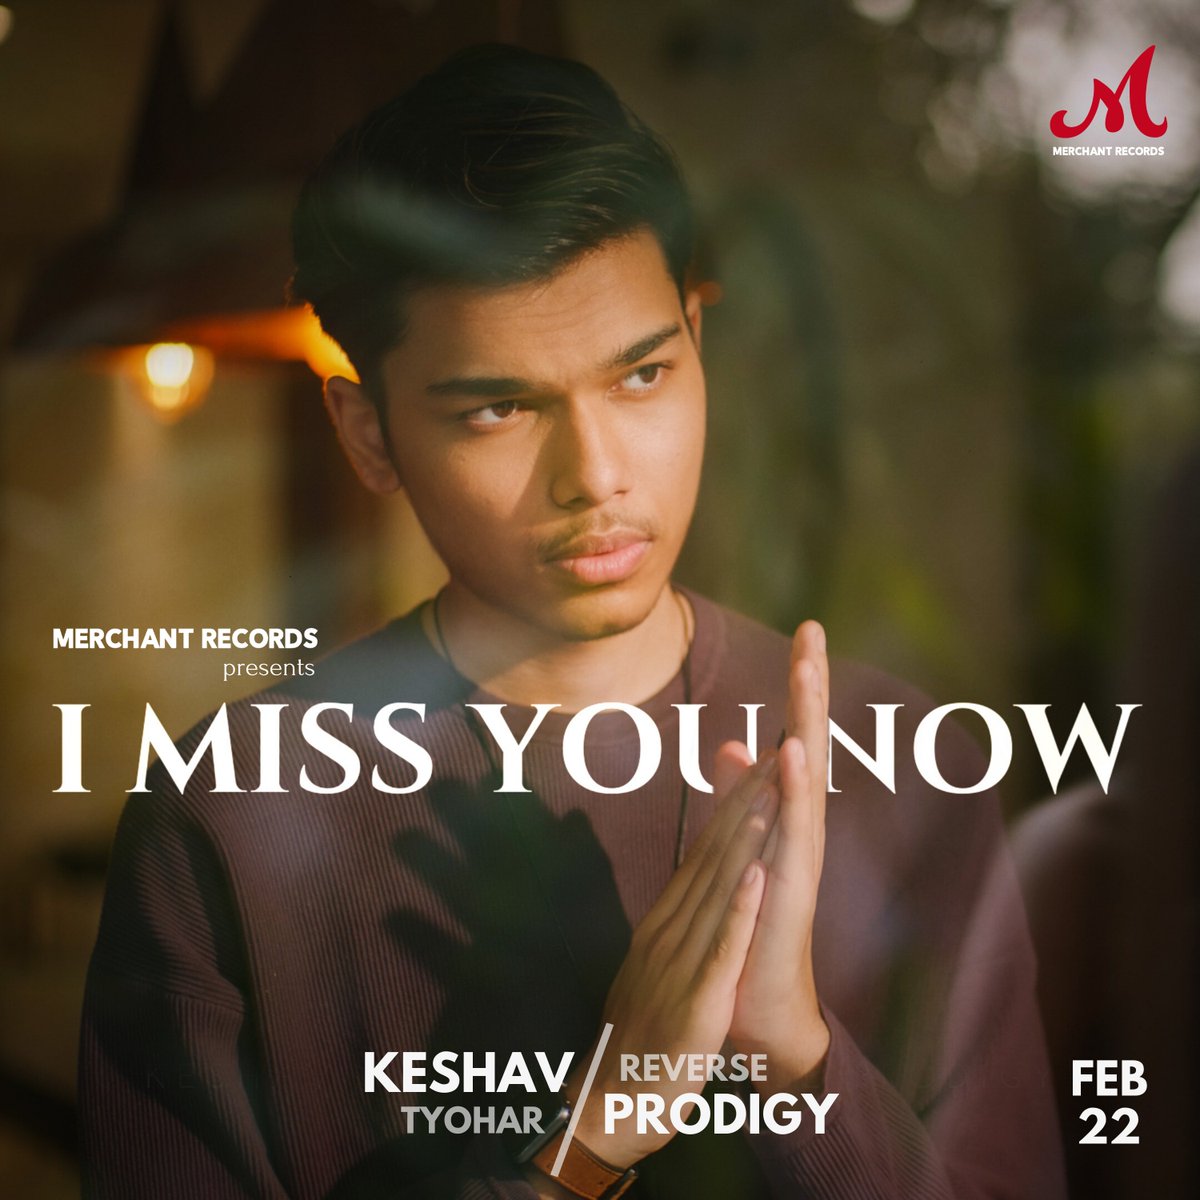 It's time to bring out Merchant Records' first English single with the super talented Keshav Tyohar! 

Stay tuned - 'i miss you now' out on 22.02.21! Releasing on Salim Sulaiman YT, subscribe now for regular updates! 

#imissyounow #KeshavTyohar #ReverseProdigy #MerchantRecords